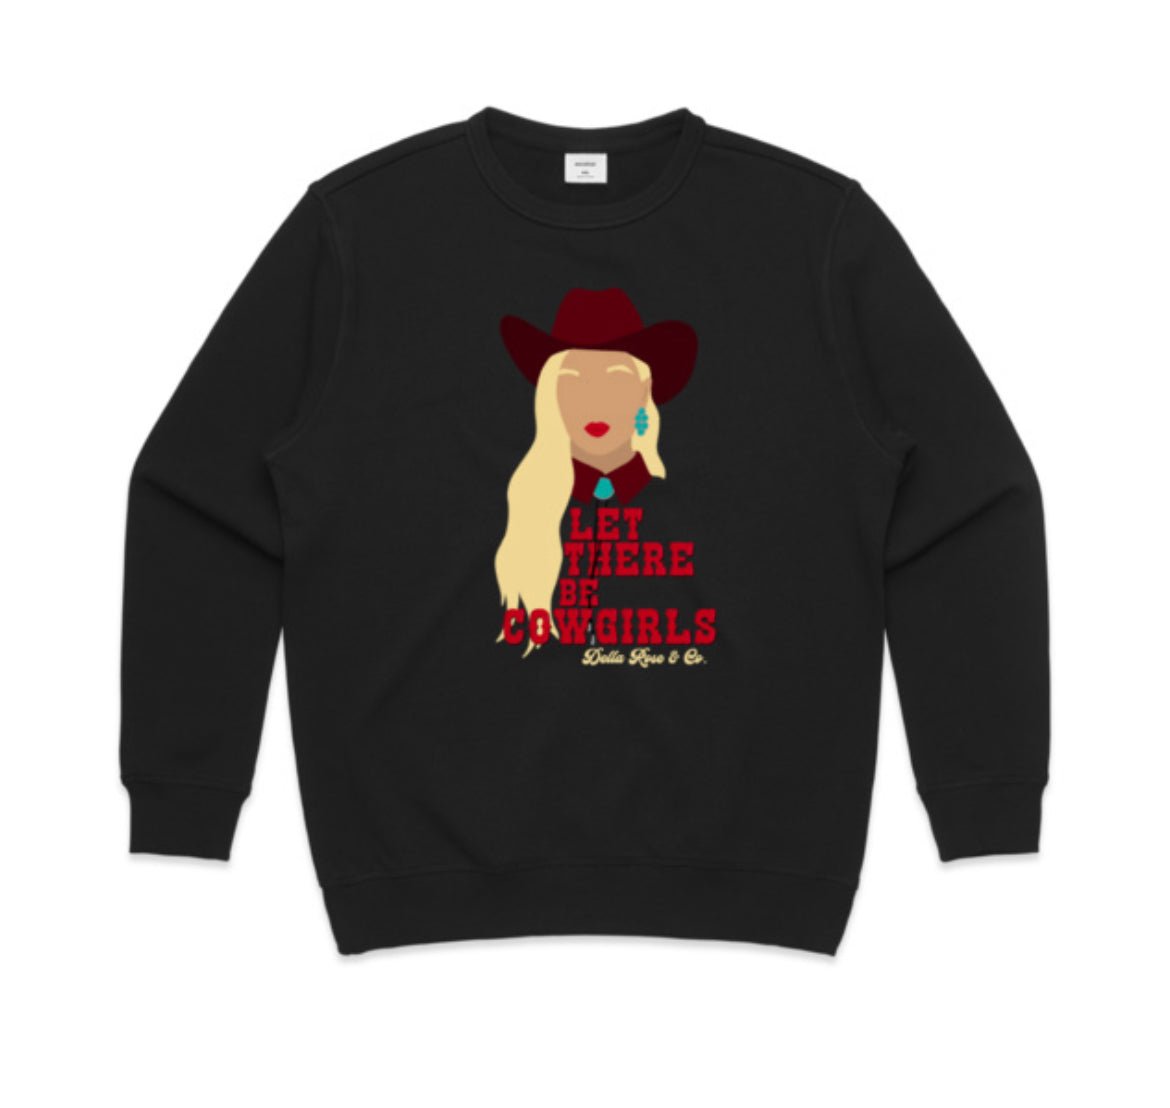 Let There Be Cowgirls Crew (blonde, ladies sizes)